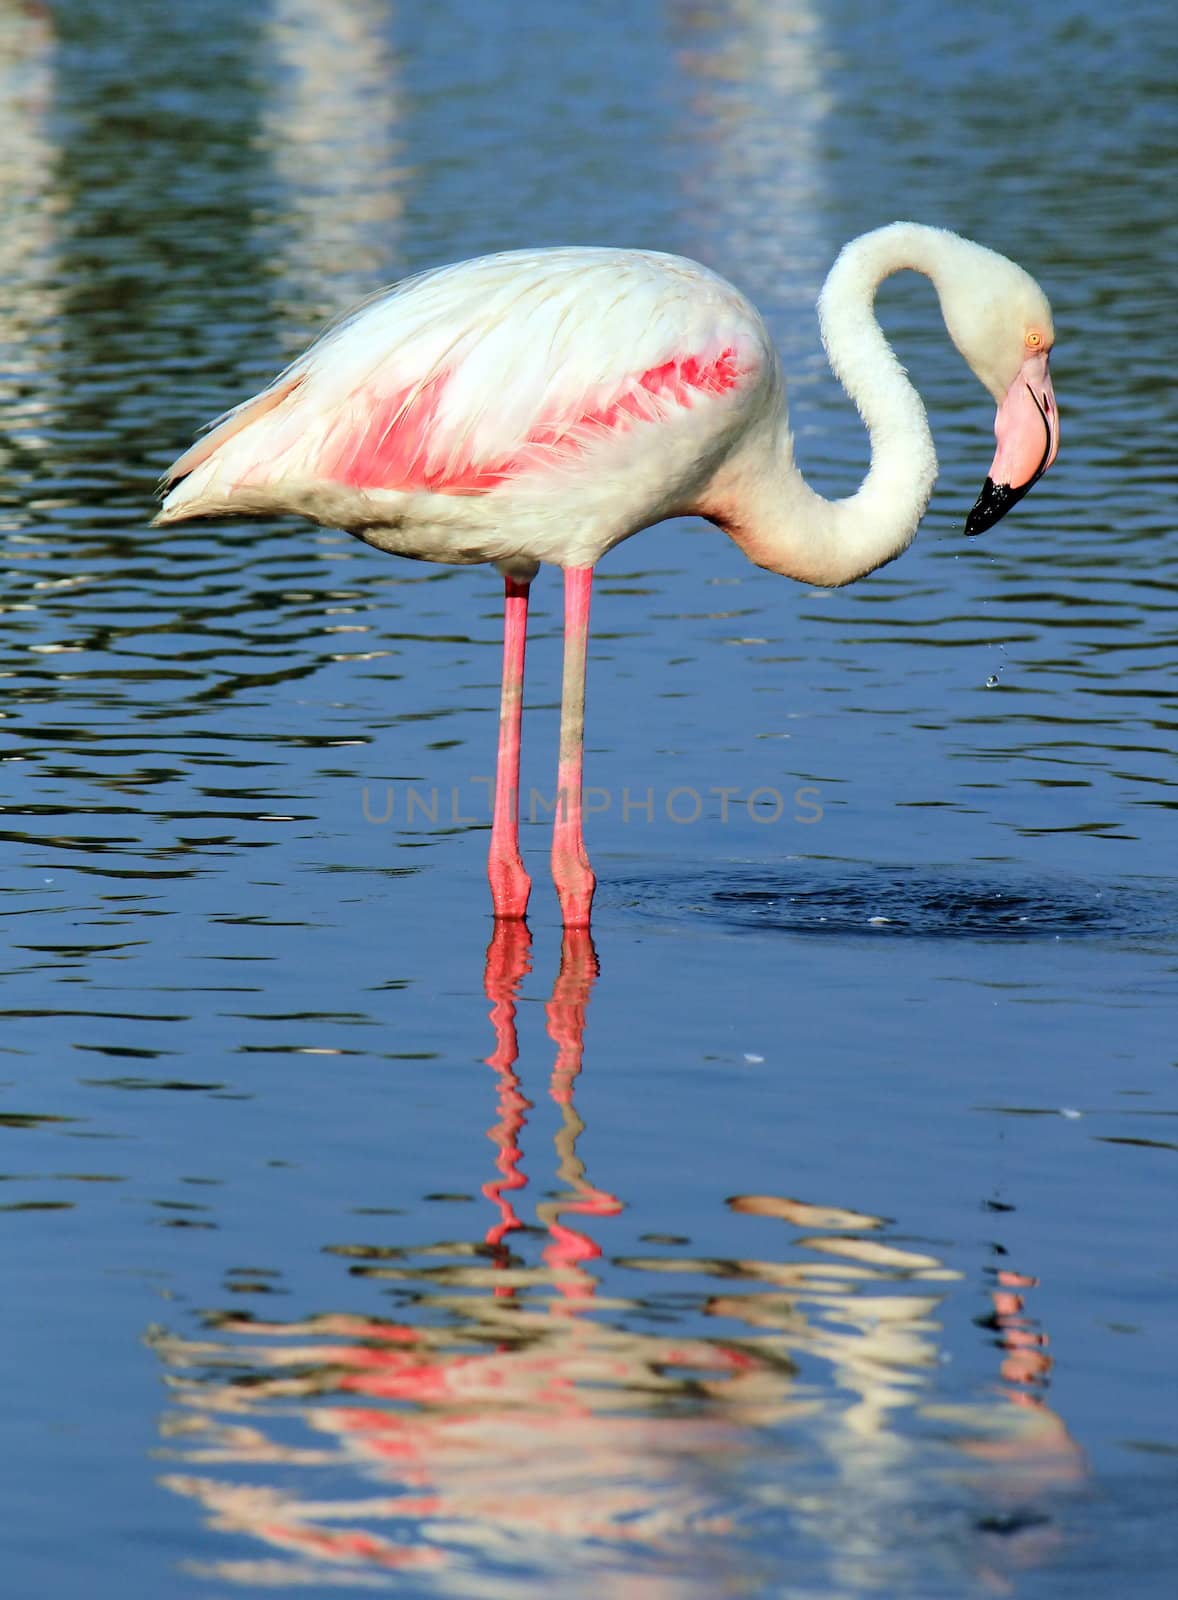 Flamingo in the water by Elenaphotos21